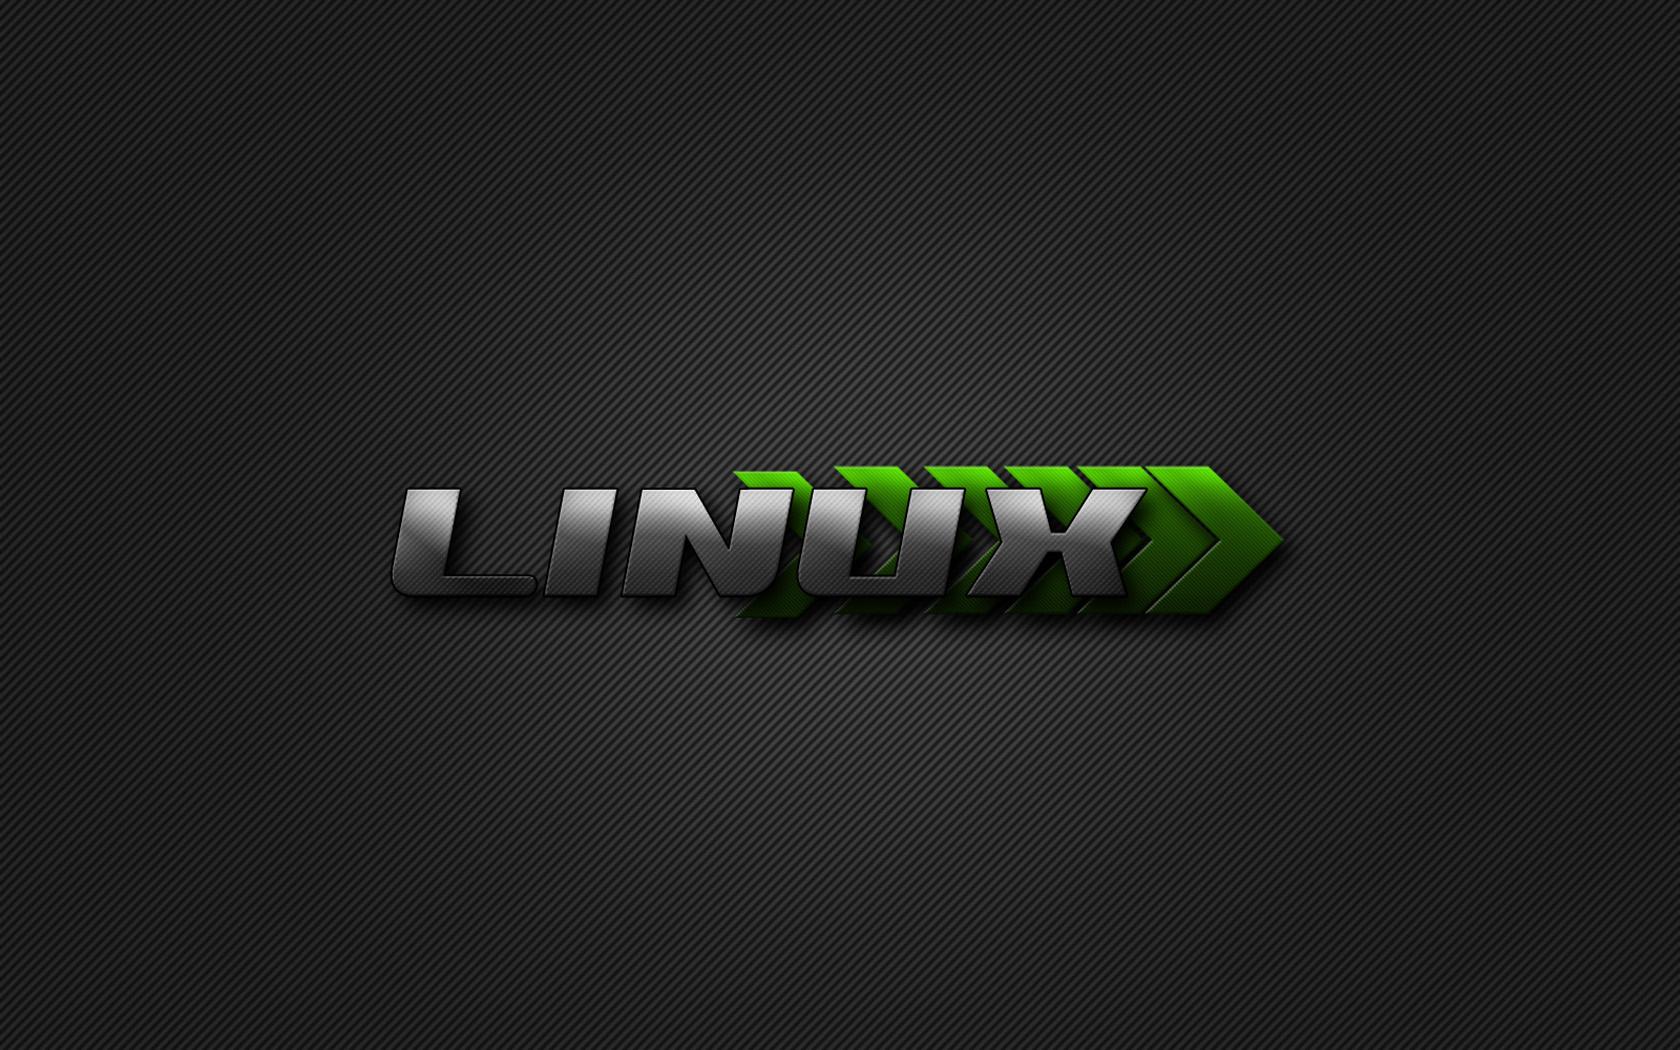 1680 x 1050 · jpeg - Linux Wallpaper and Background Image | 1680x1050